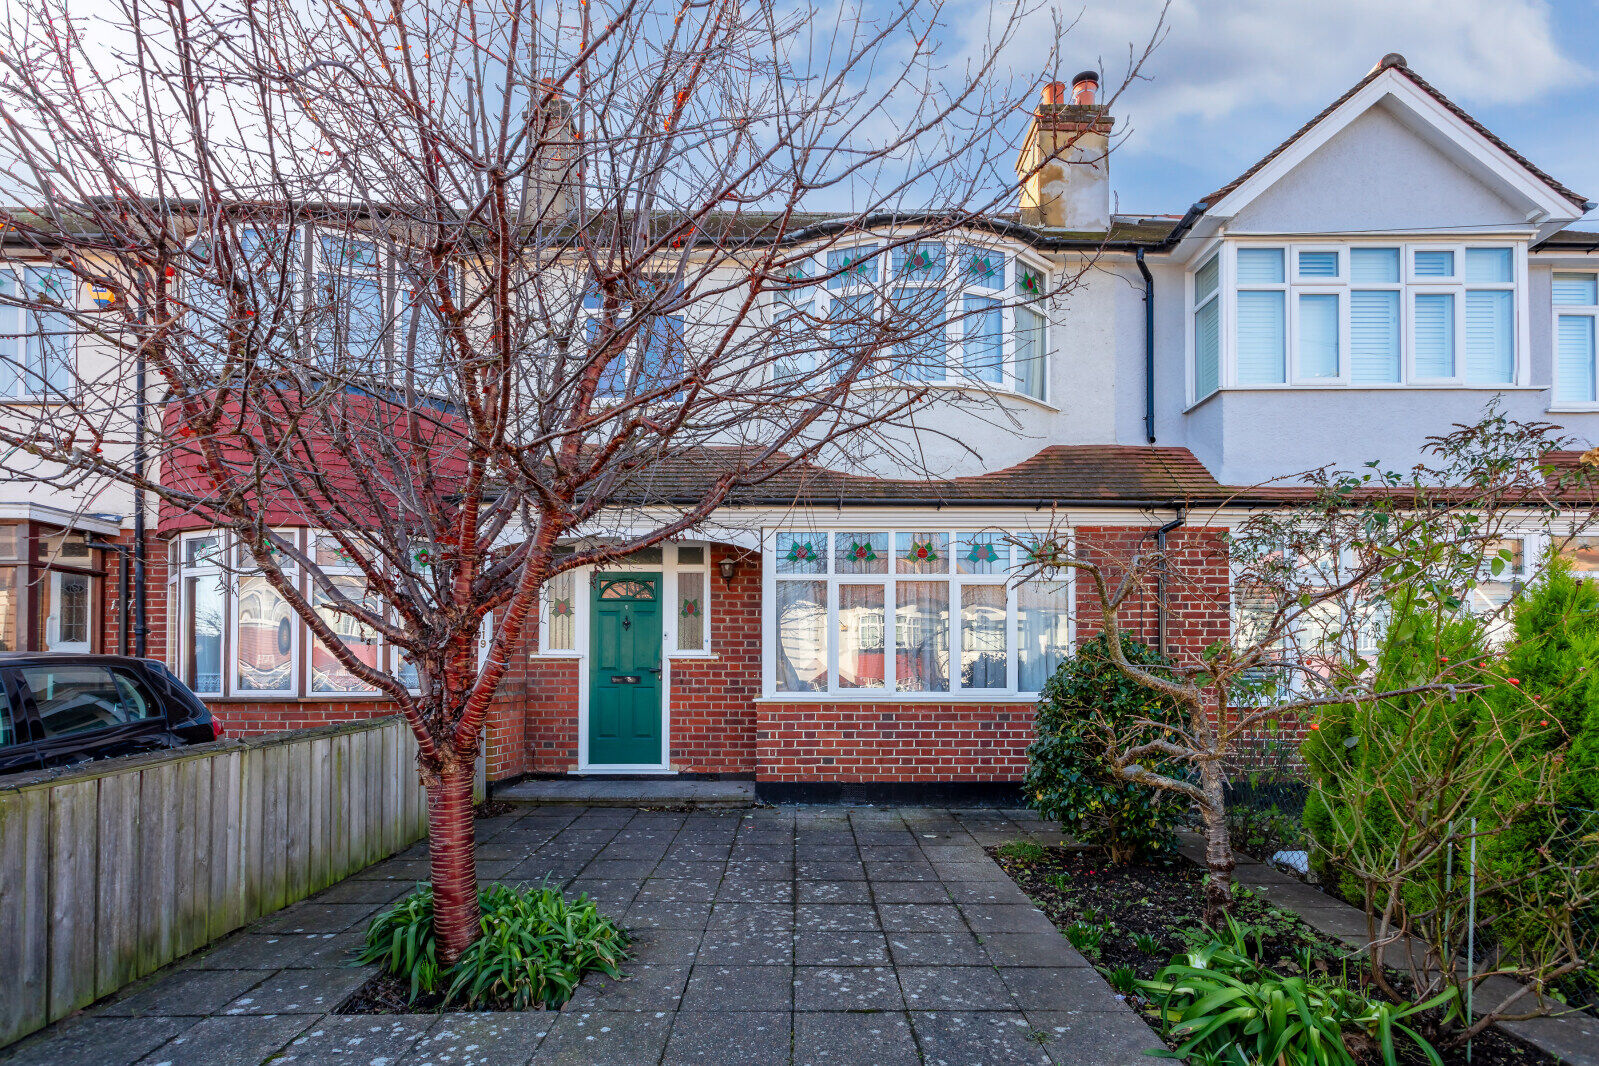 3 bedroom mid terraced house for sale Wandle Road, Morden, SM4, main image